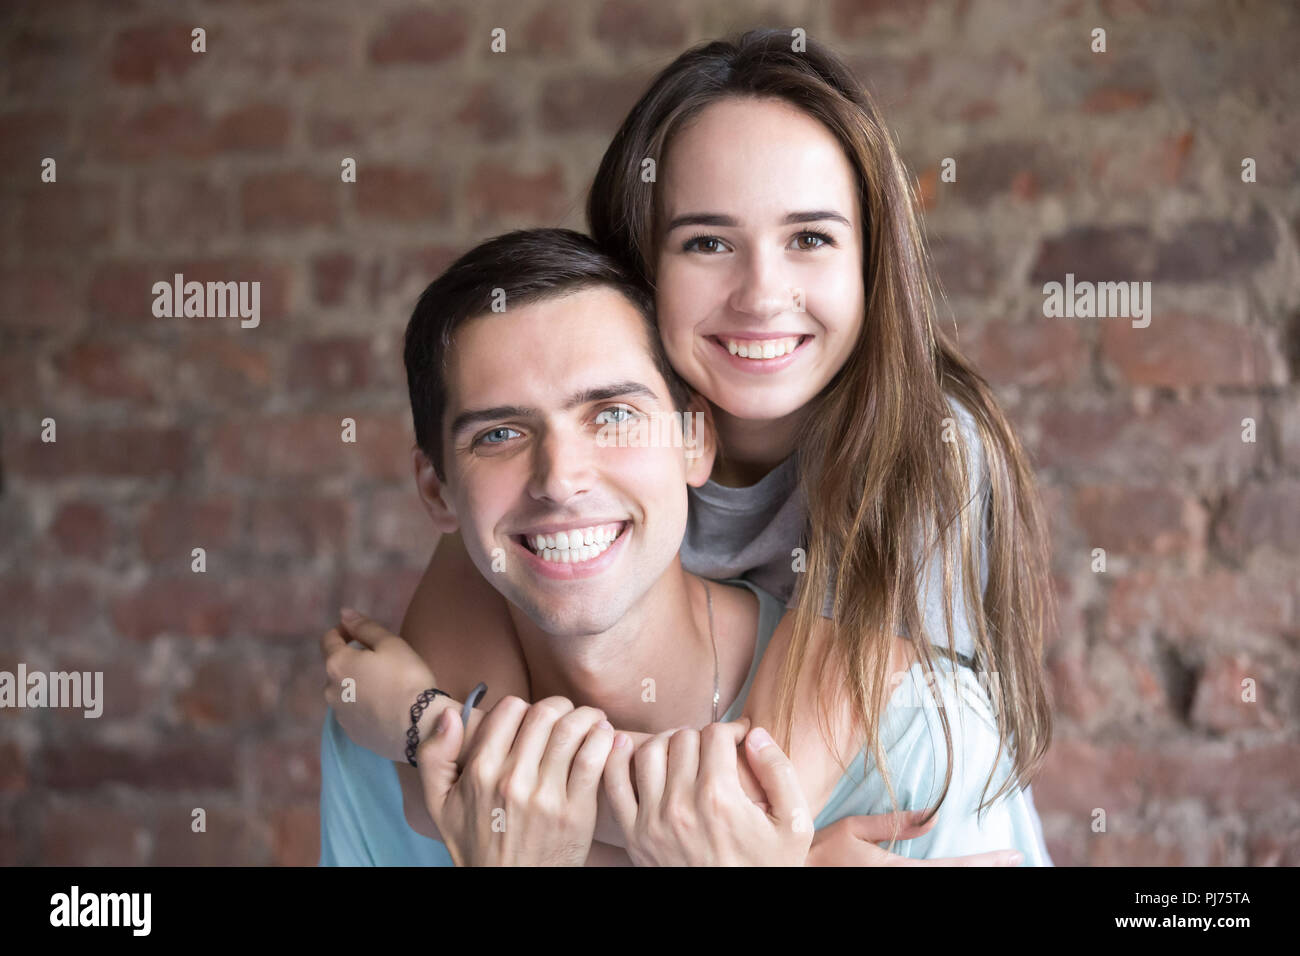 Close up portrait of smiling happy young man and woman Stock Photo